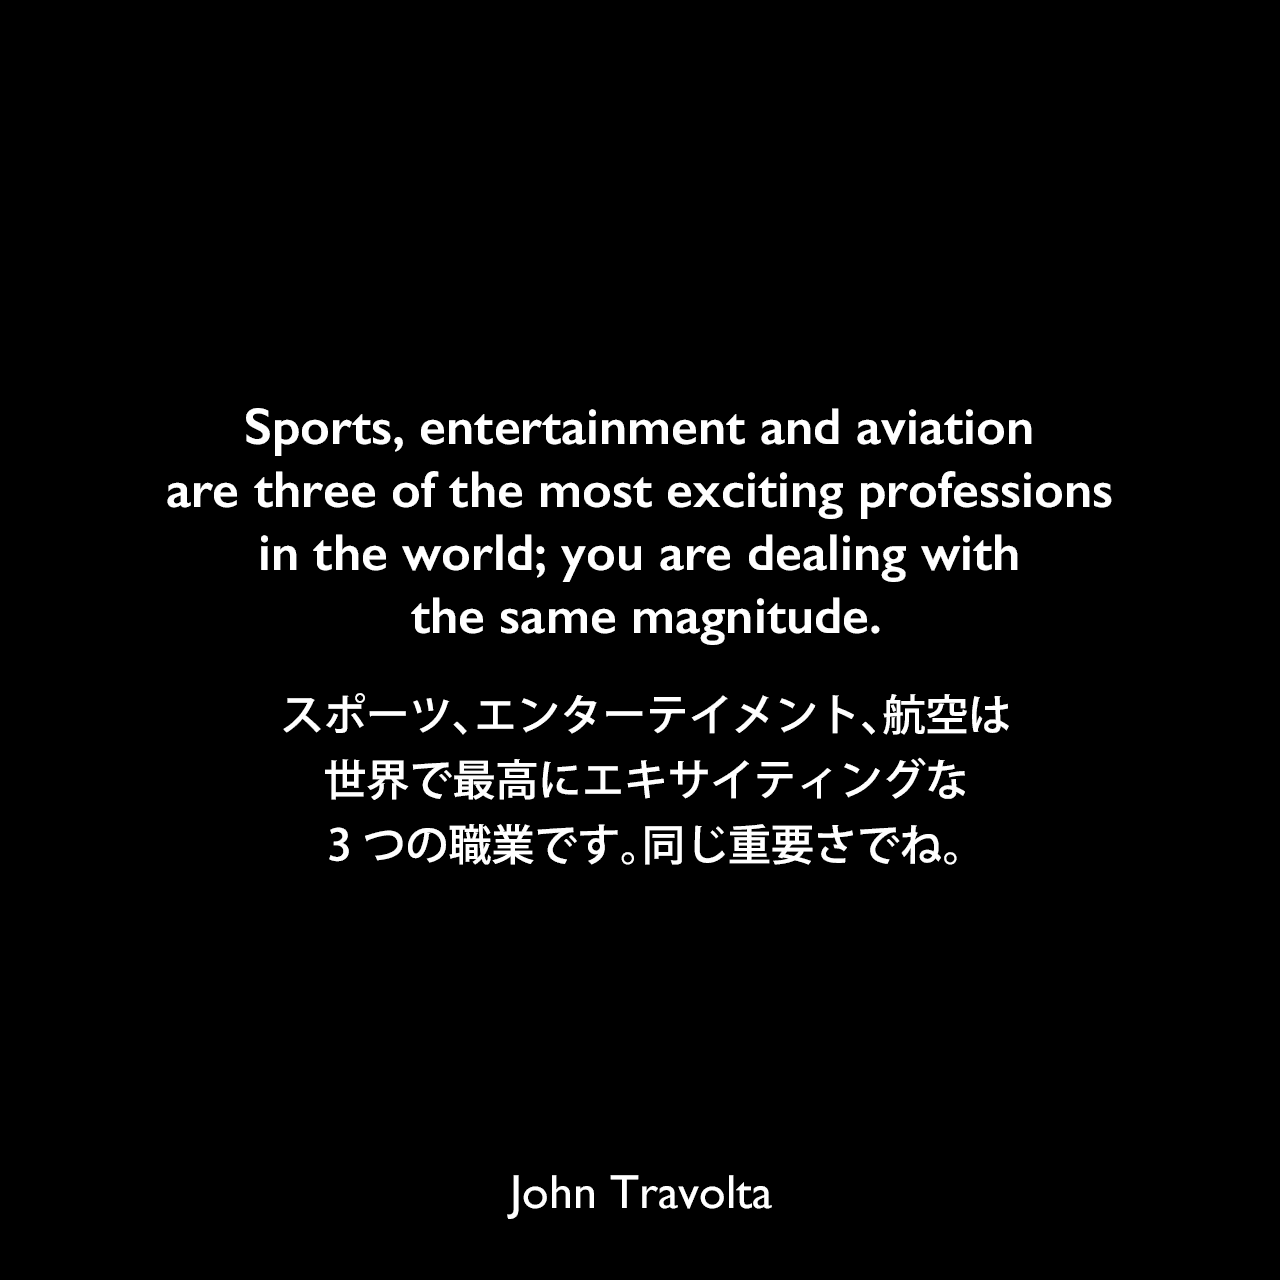 Sports, entertainment and aviation are three of the most exciting professions in the world; you are dealing with the same magnitude.スポーツ、エンターテイメント、航空は、世界で最高にエキサイティングな3つの職業です。同じ重要さでね。John Travolta